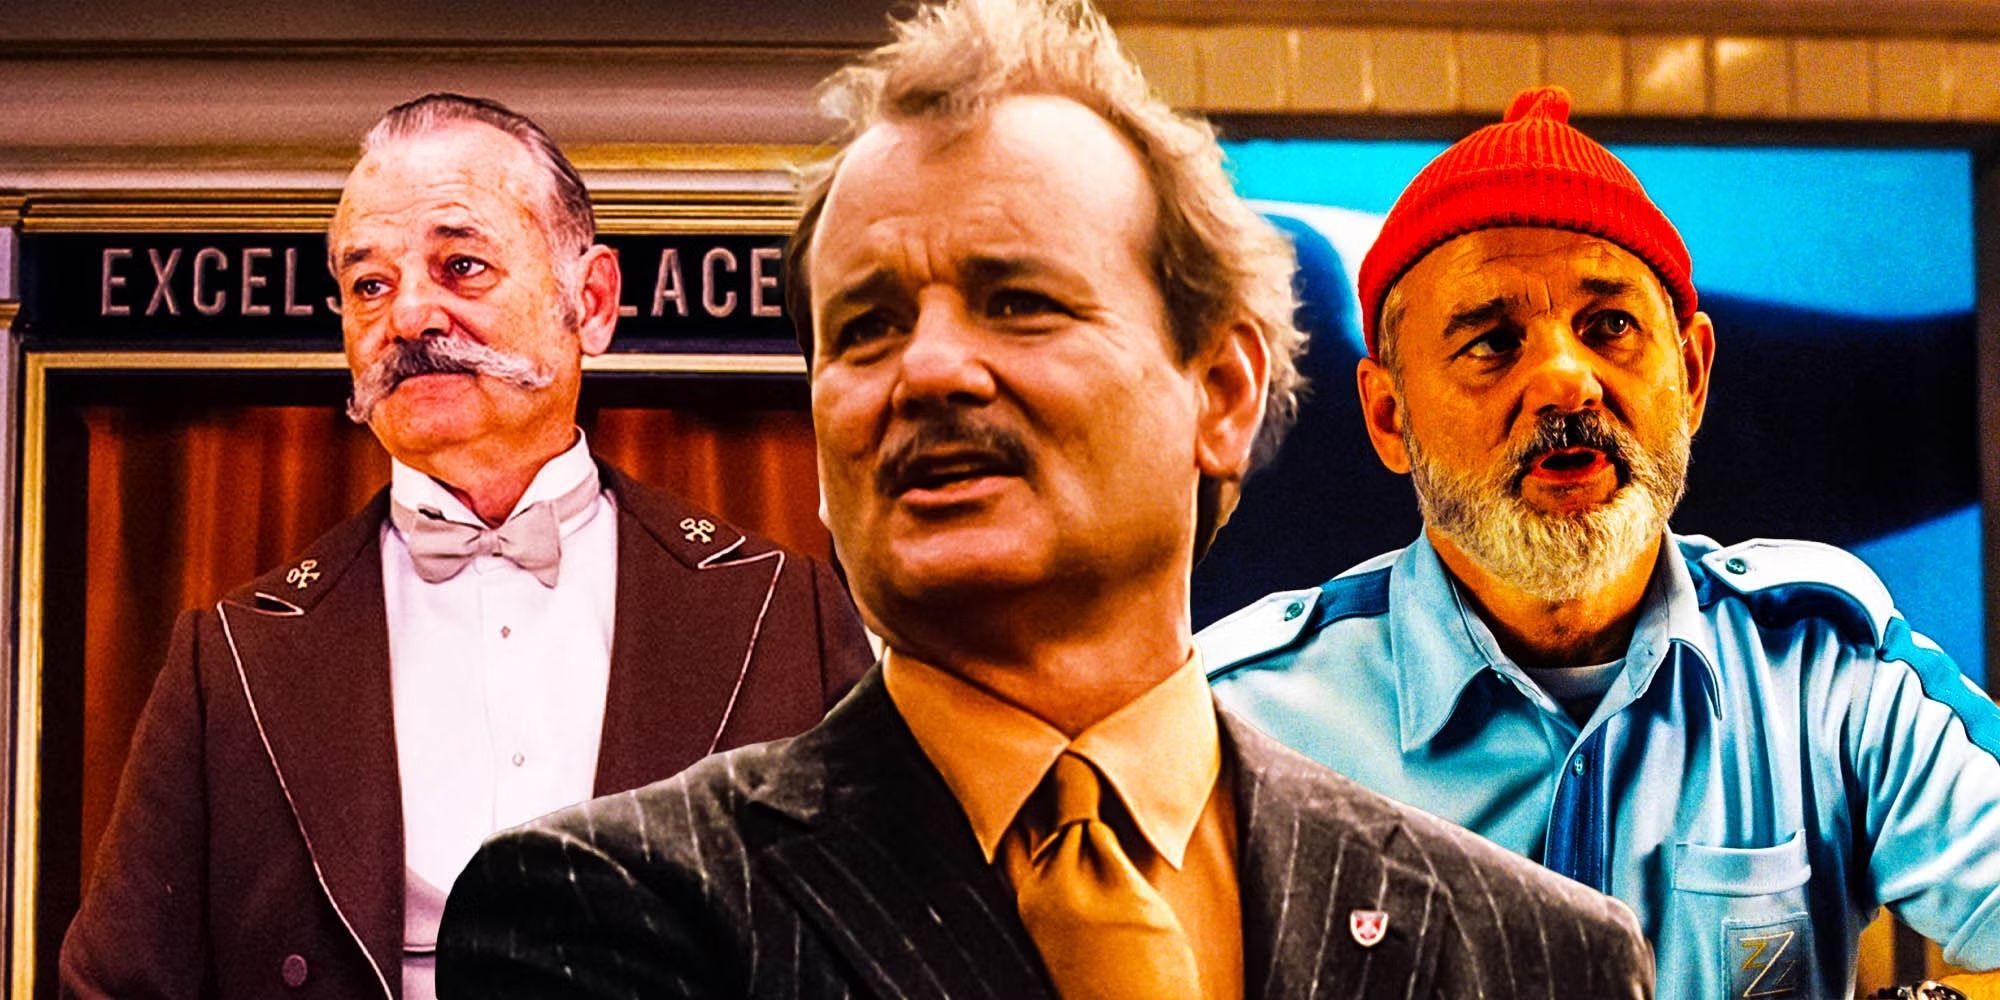 Bill Murray in the Wes Anderson films A Life Aquatic, Rushmore, and Grand Budapest Hotel